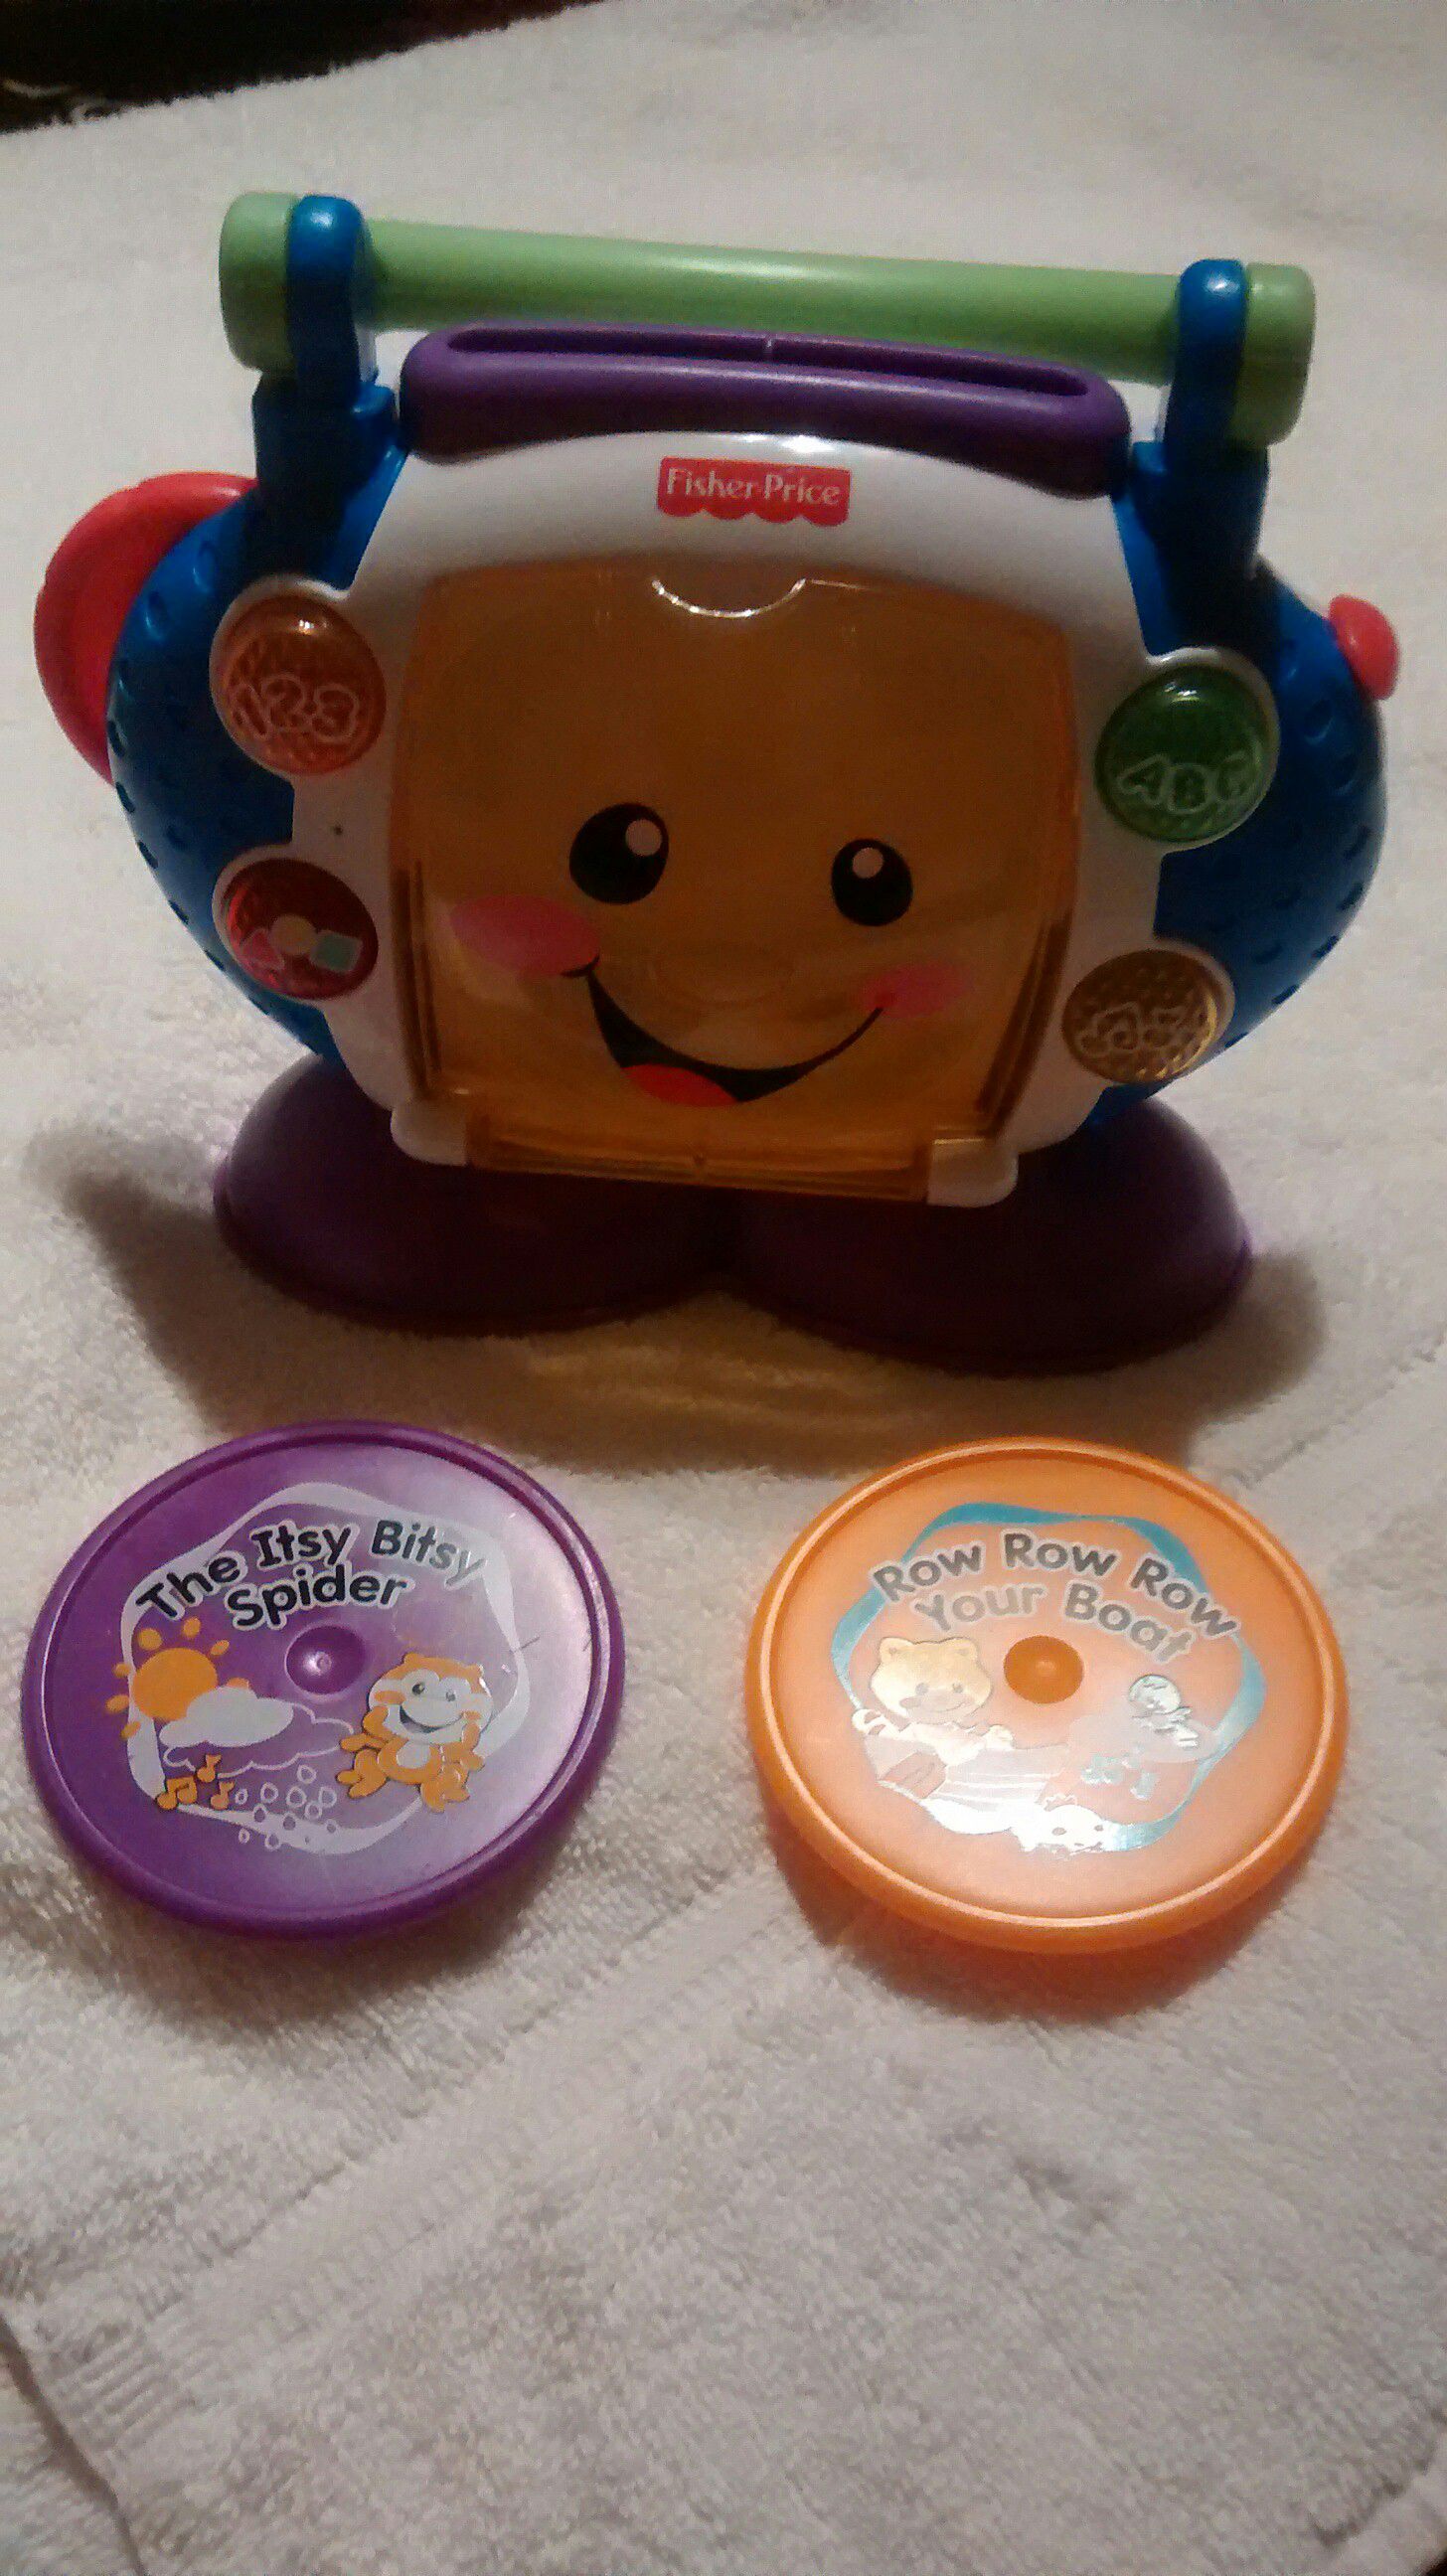 Toy Fisher Price mini CD player for kids